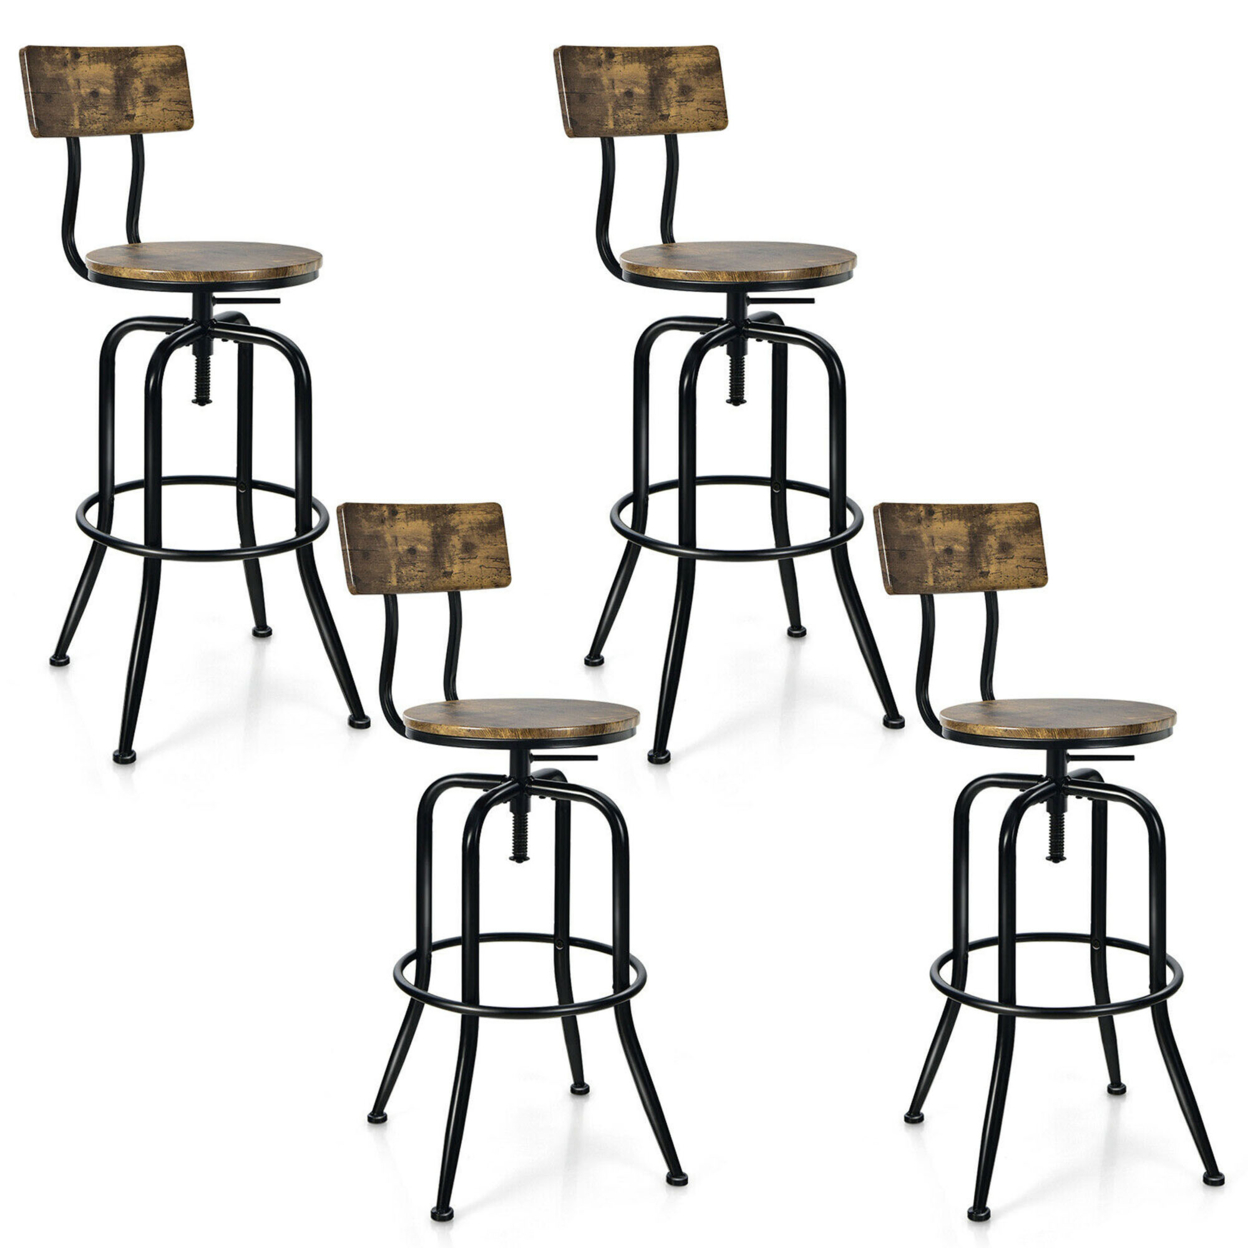 Set Of 4 Industrial Bar Stool Adjustable Swivel Counter-Height Dining Side Chair